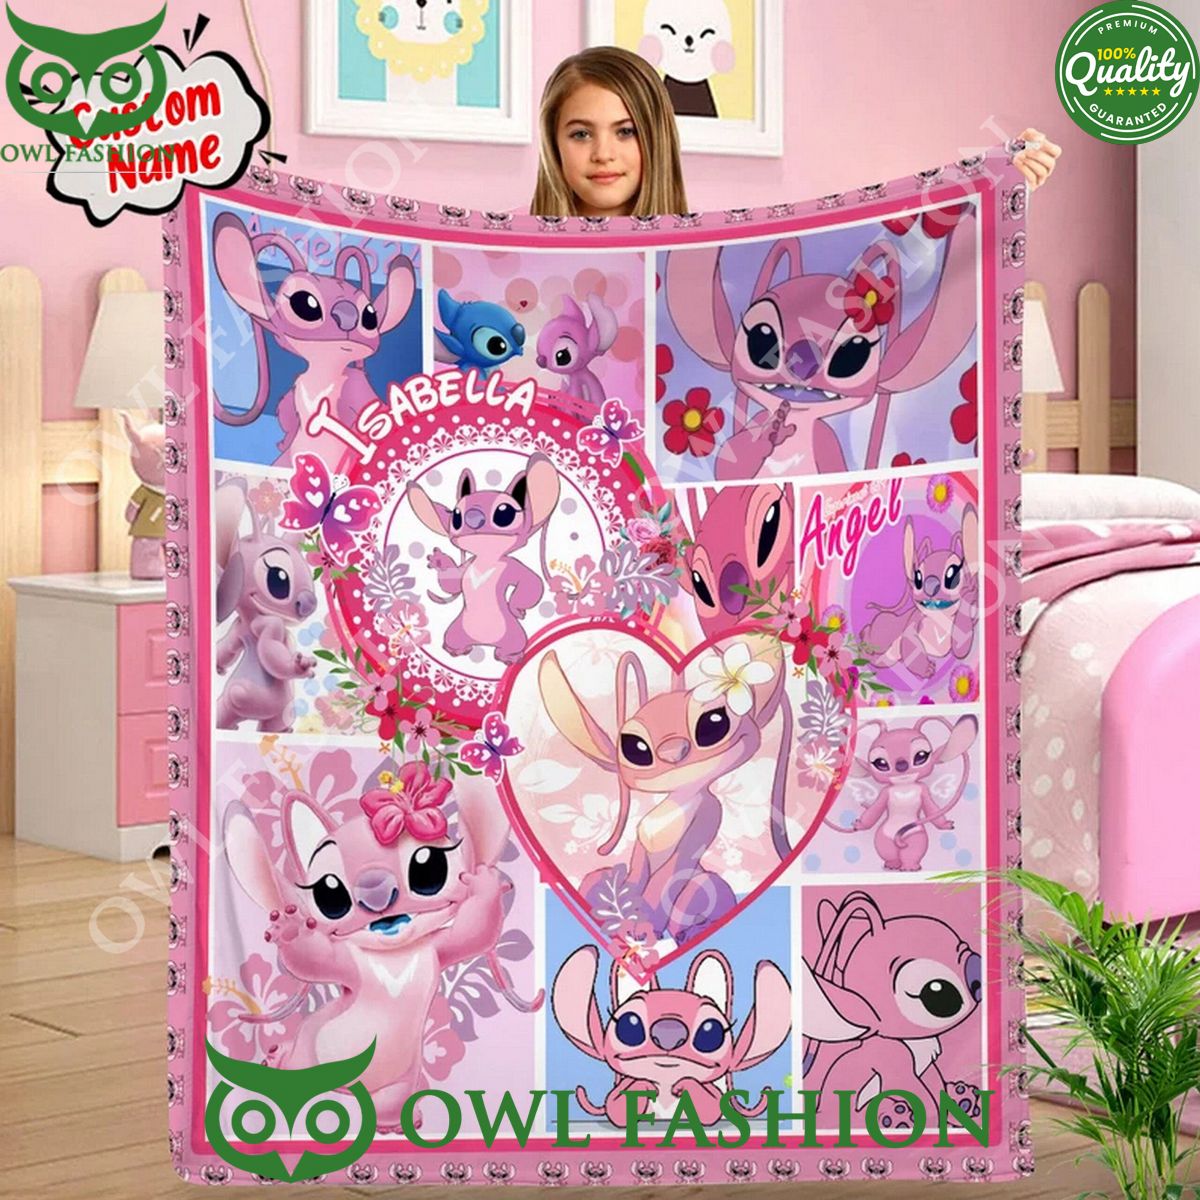 limited edition pink lilo quilt blanket stitch custom name 1 Wczx7.jpg